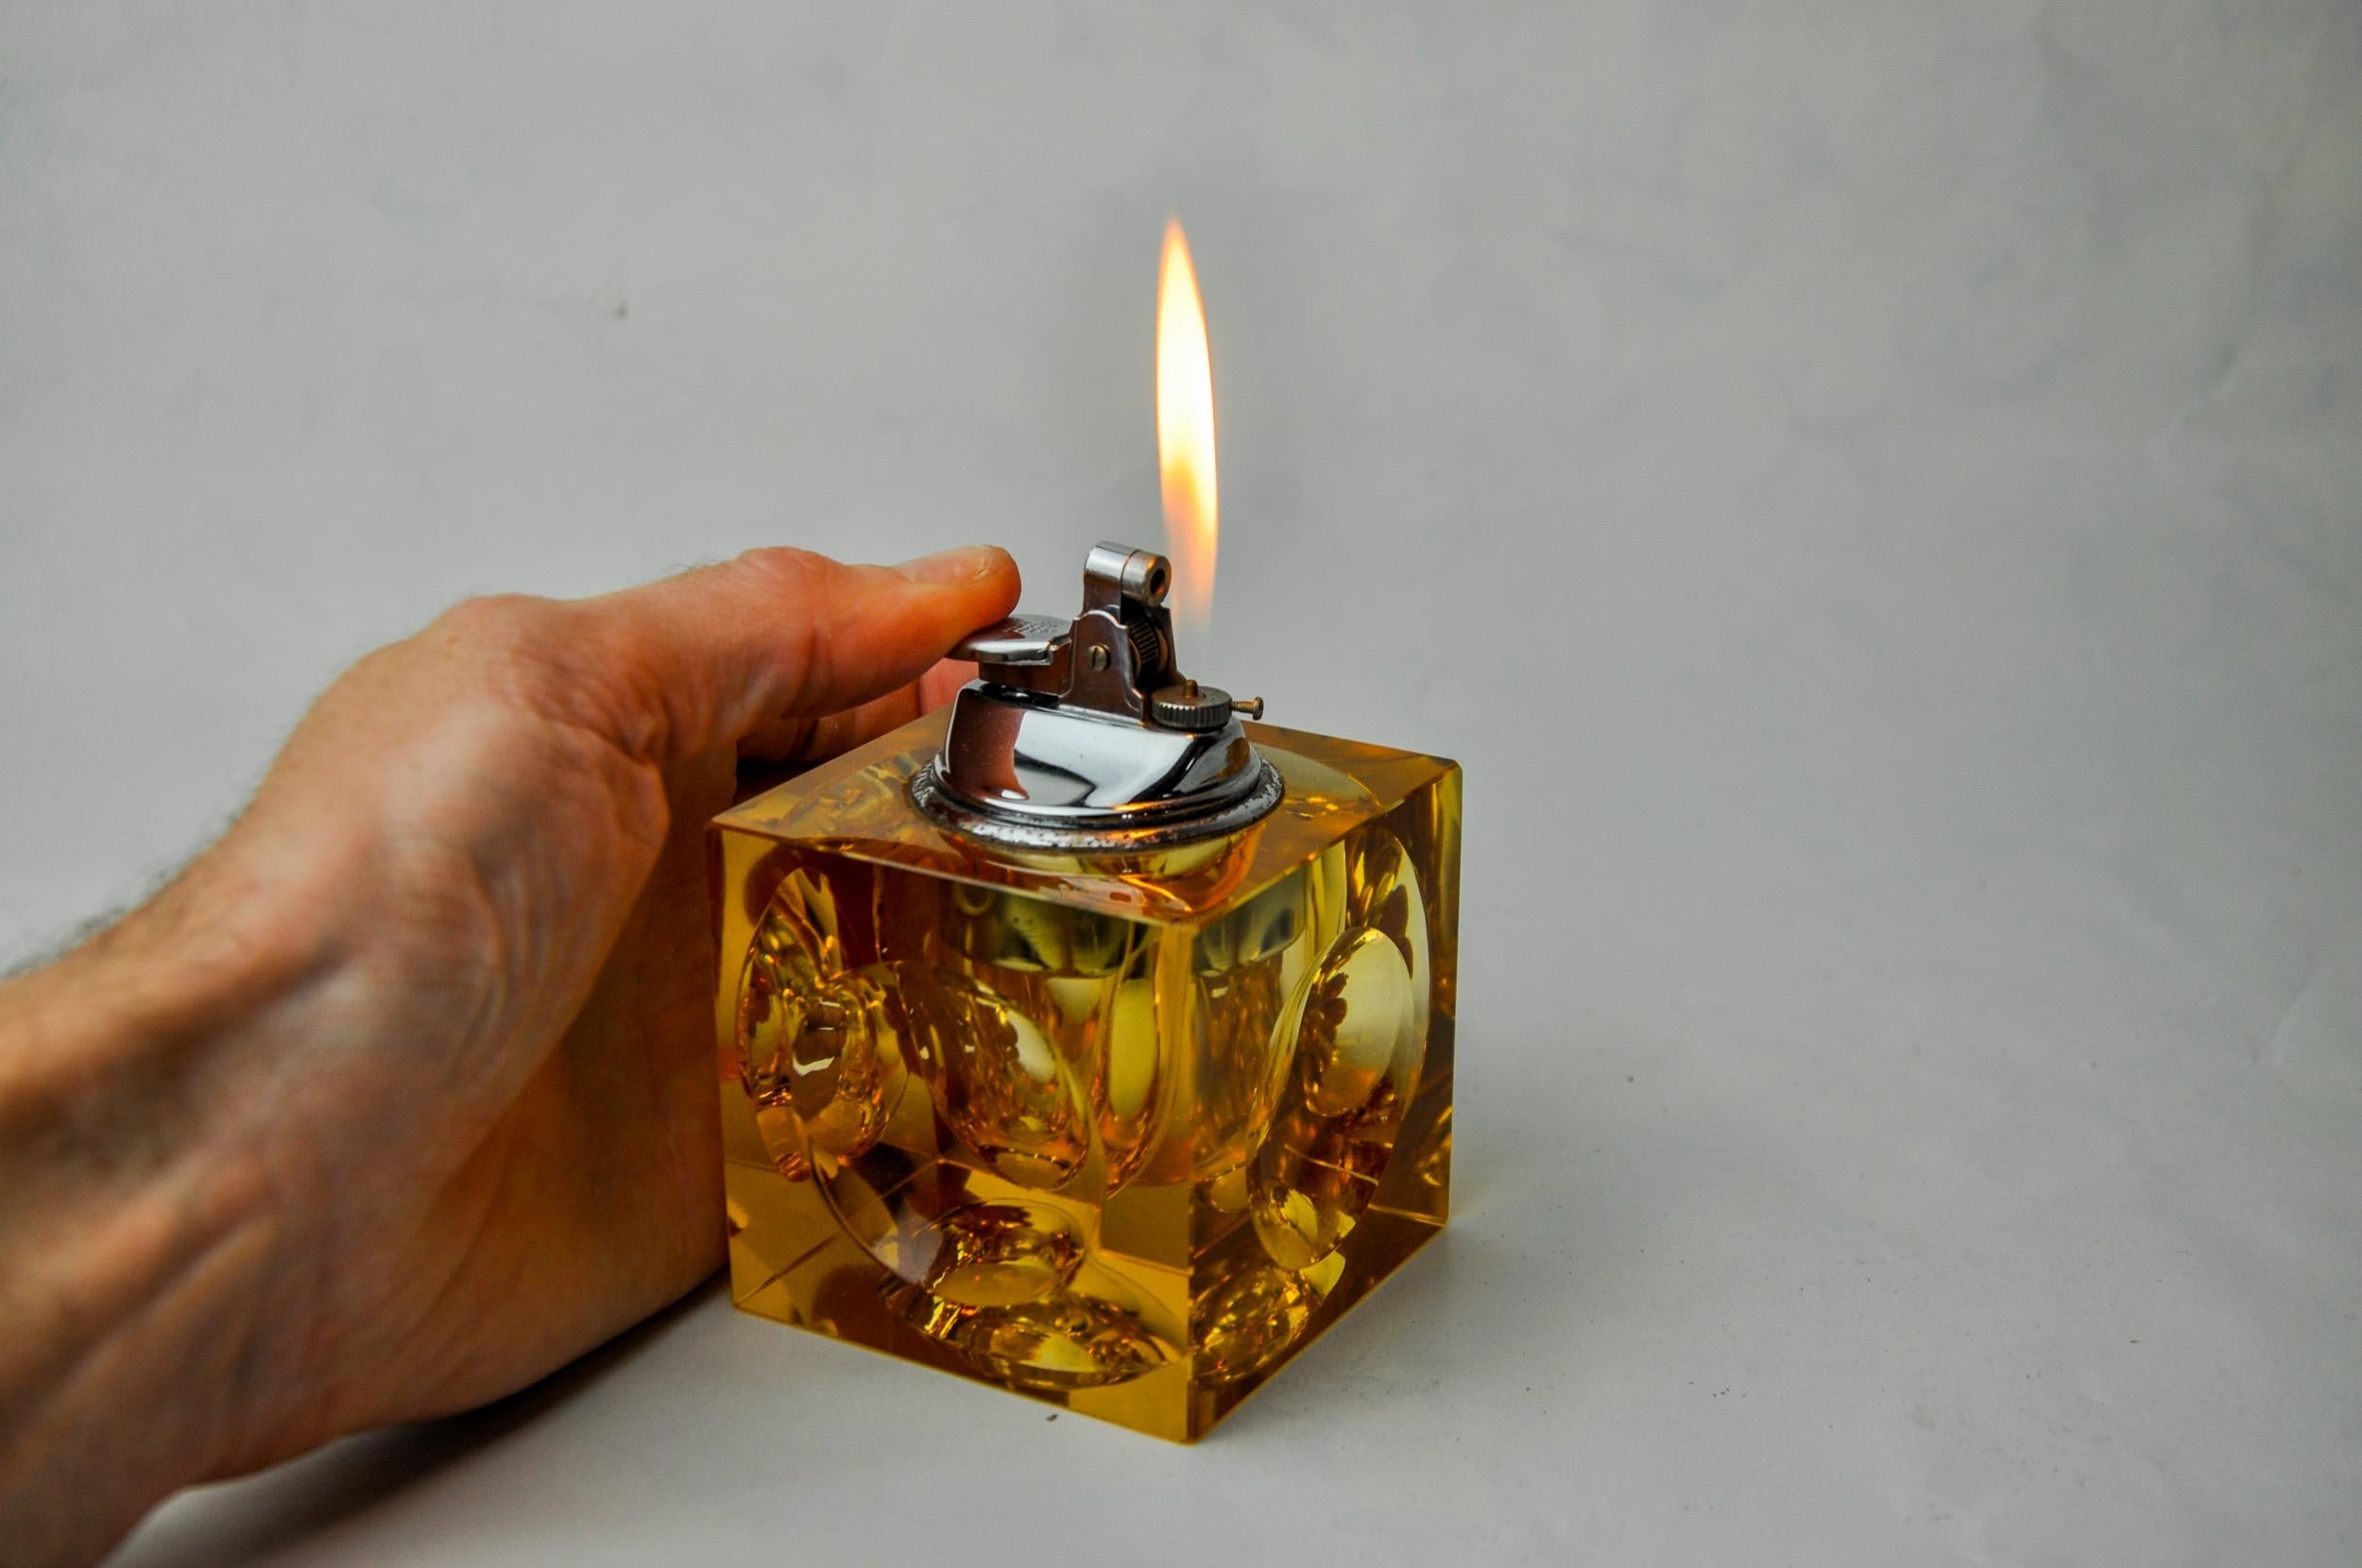 Superb and rare magnifying glass lighter designed and produced by Antonio Imperatore in Italy in the 1970s. Orange Murano glass lighter with a magnifying glass effect on its facets, handcrafted by Venetian master glassmakers. Decorative object that